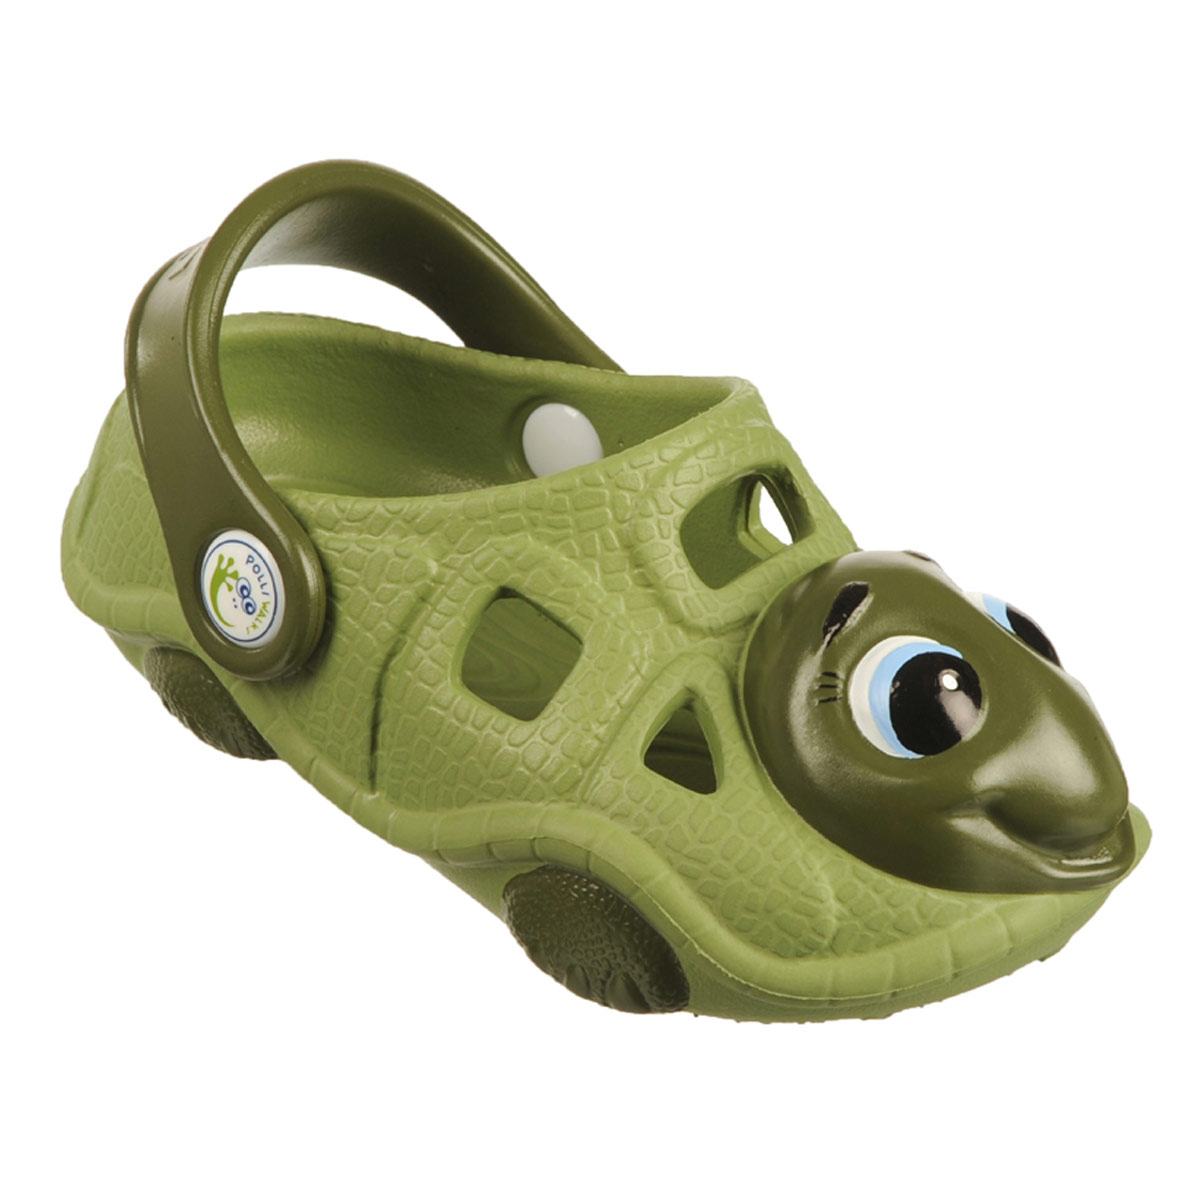 Polliwalks : Toddler shoes Timmy the Turtle Green # 9